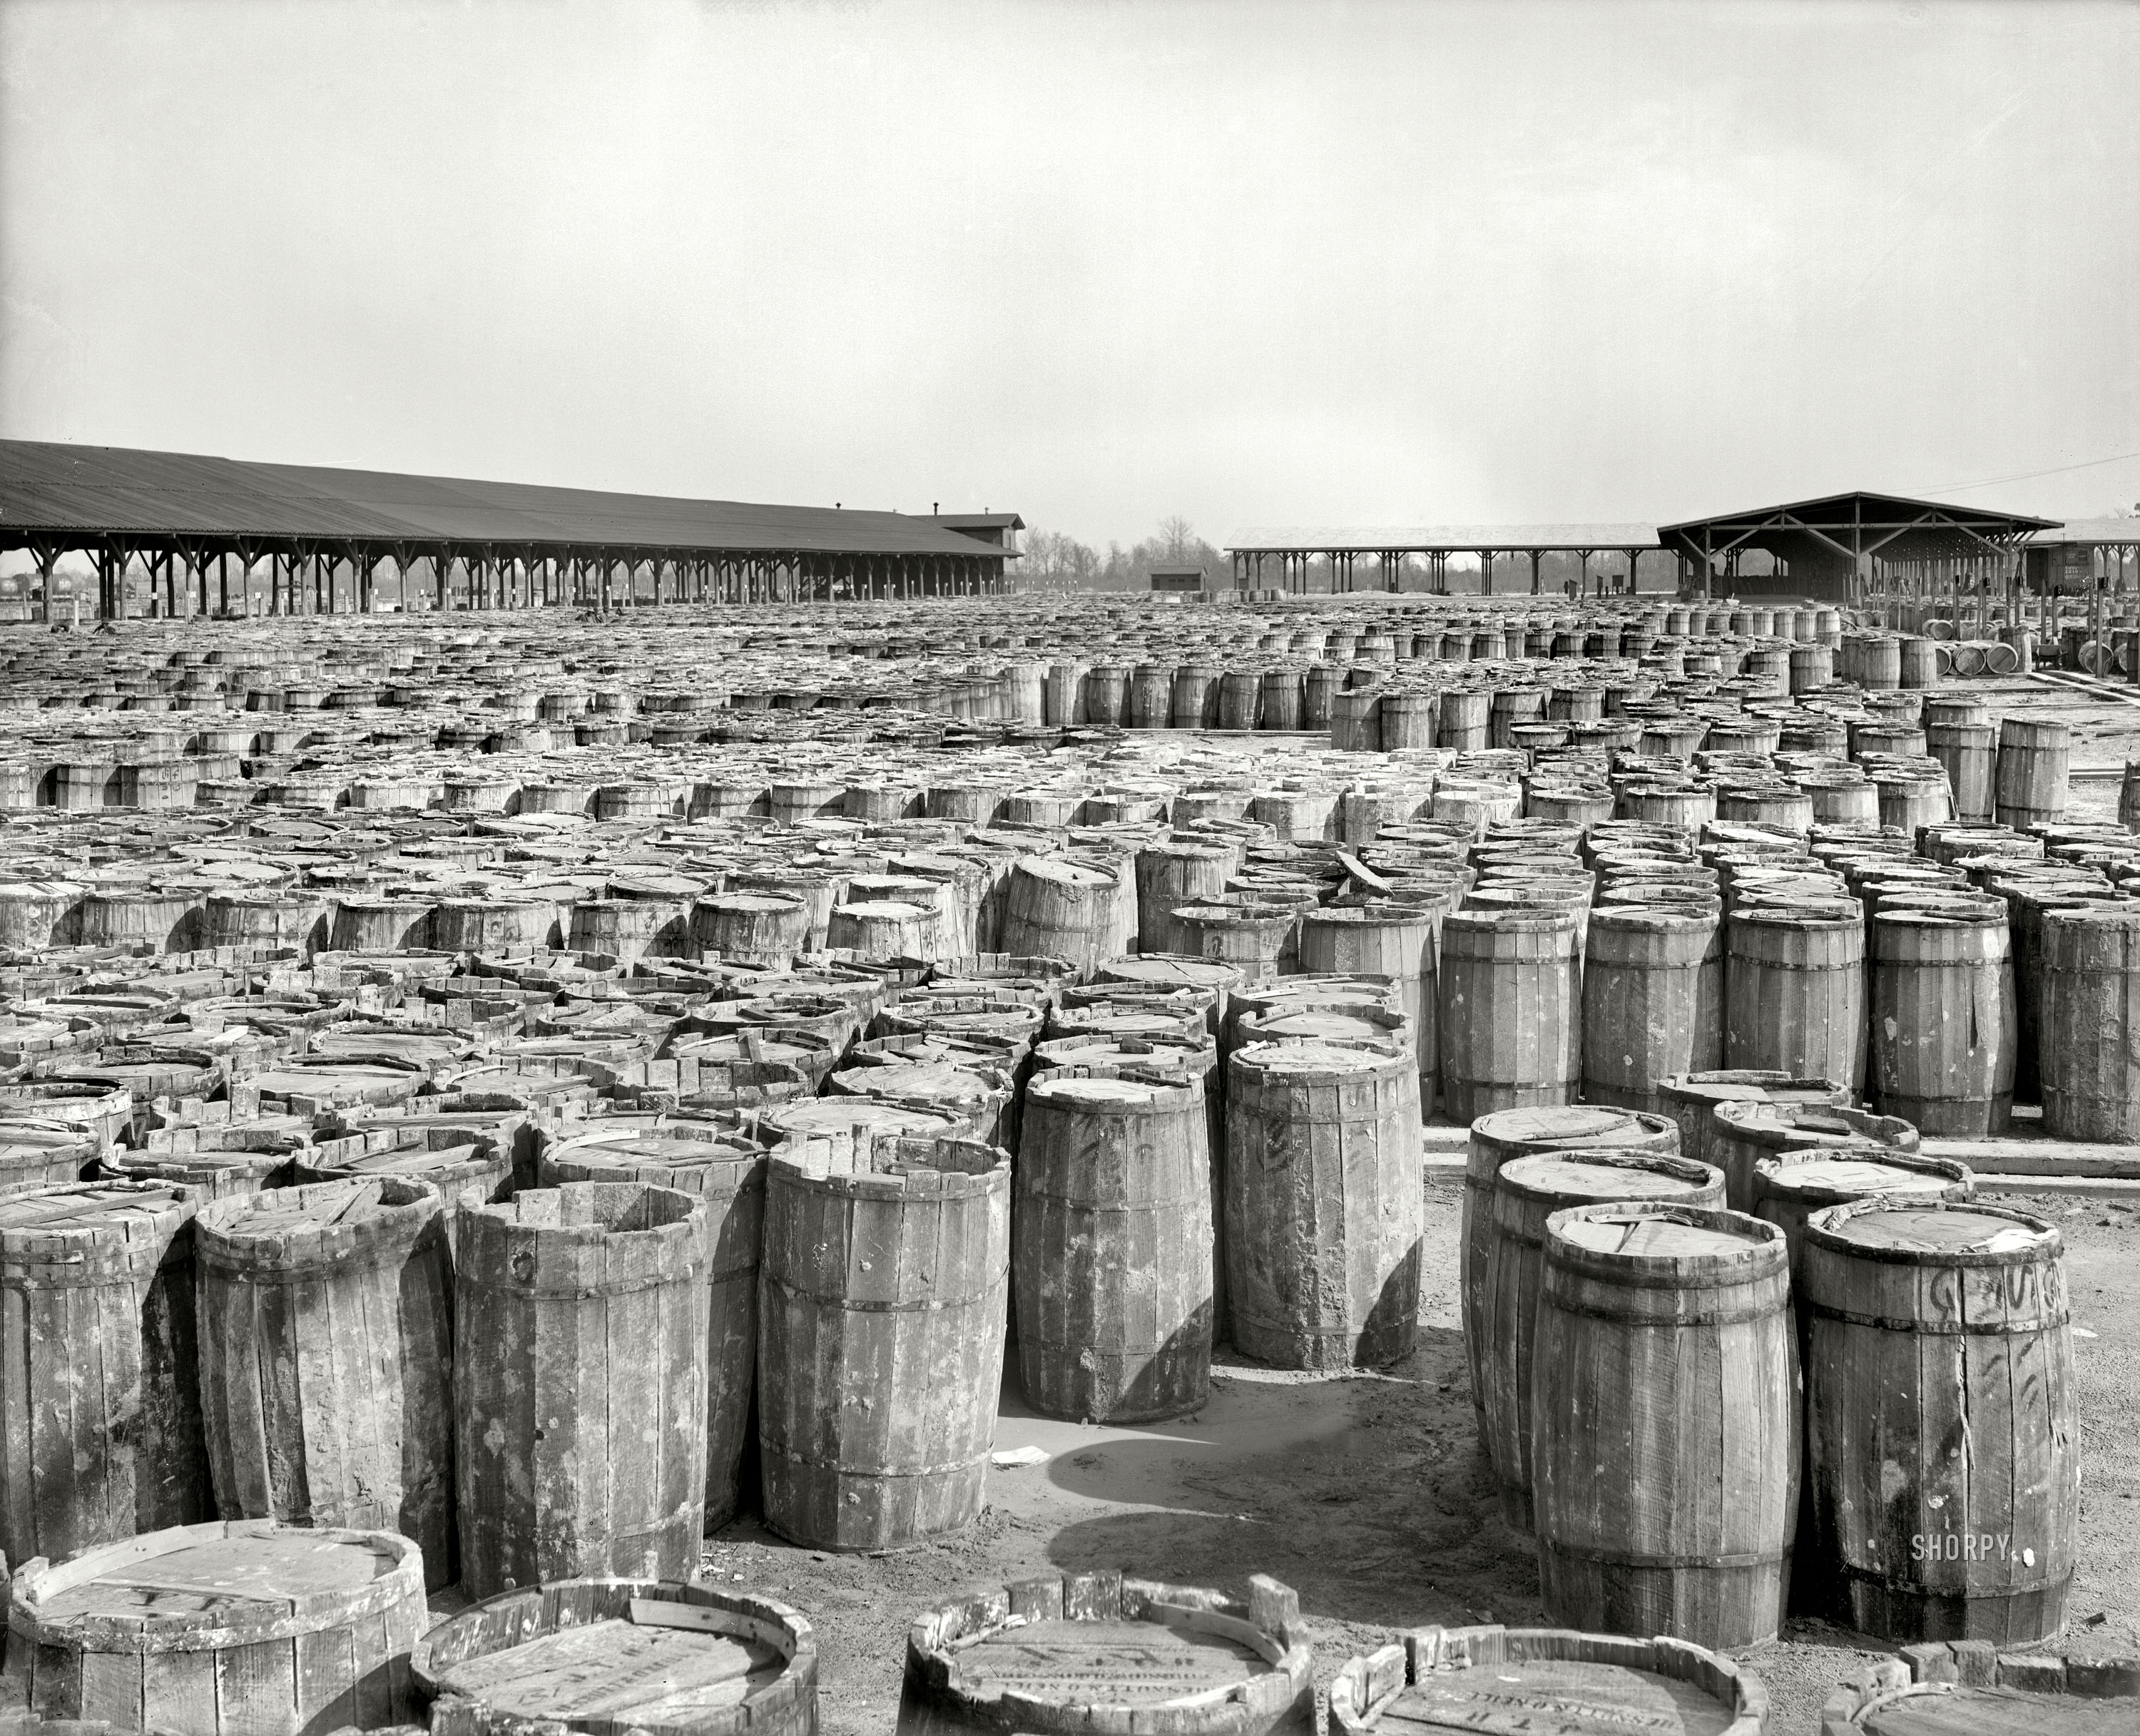 Georgia circa 1904. "Naval stores, Chesnutt & O'Neill, Savannah." A center of the resin and turpentine, or naval stores, industry. View full size.